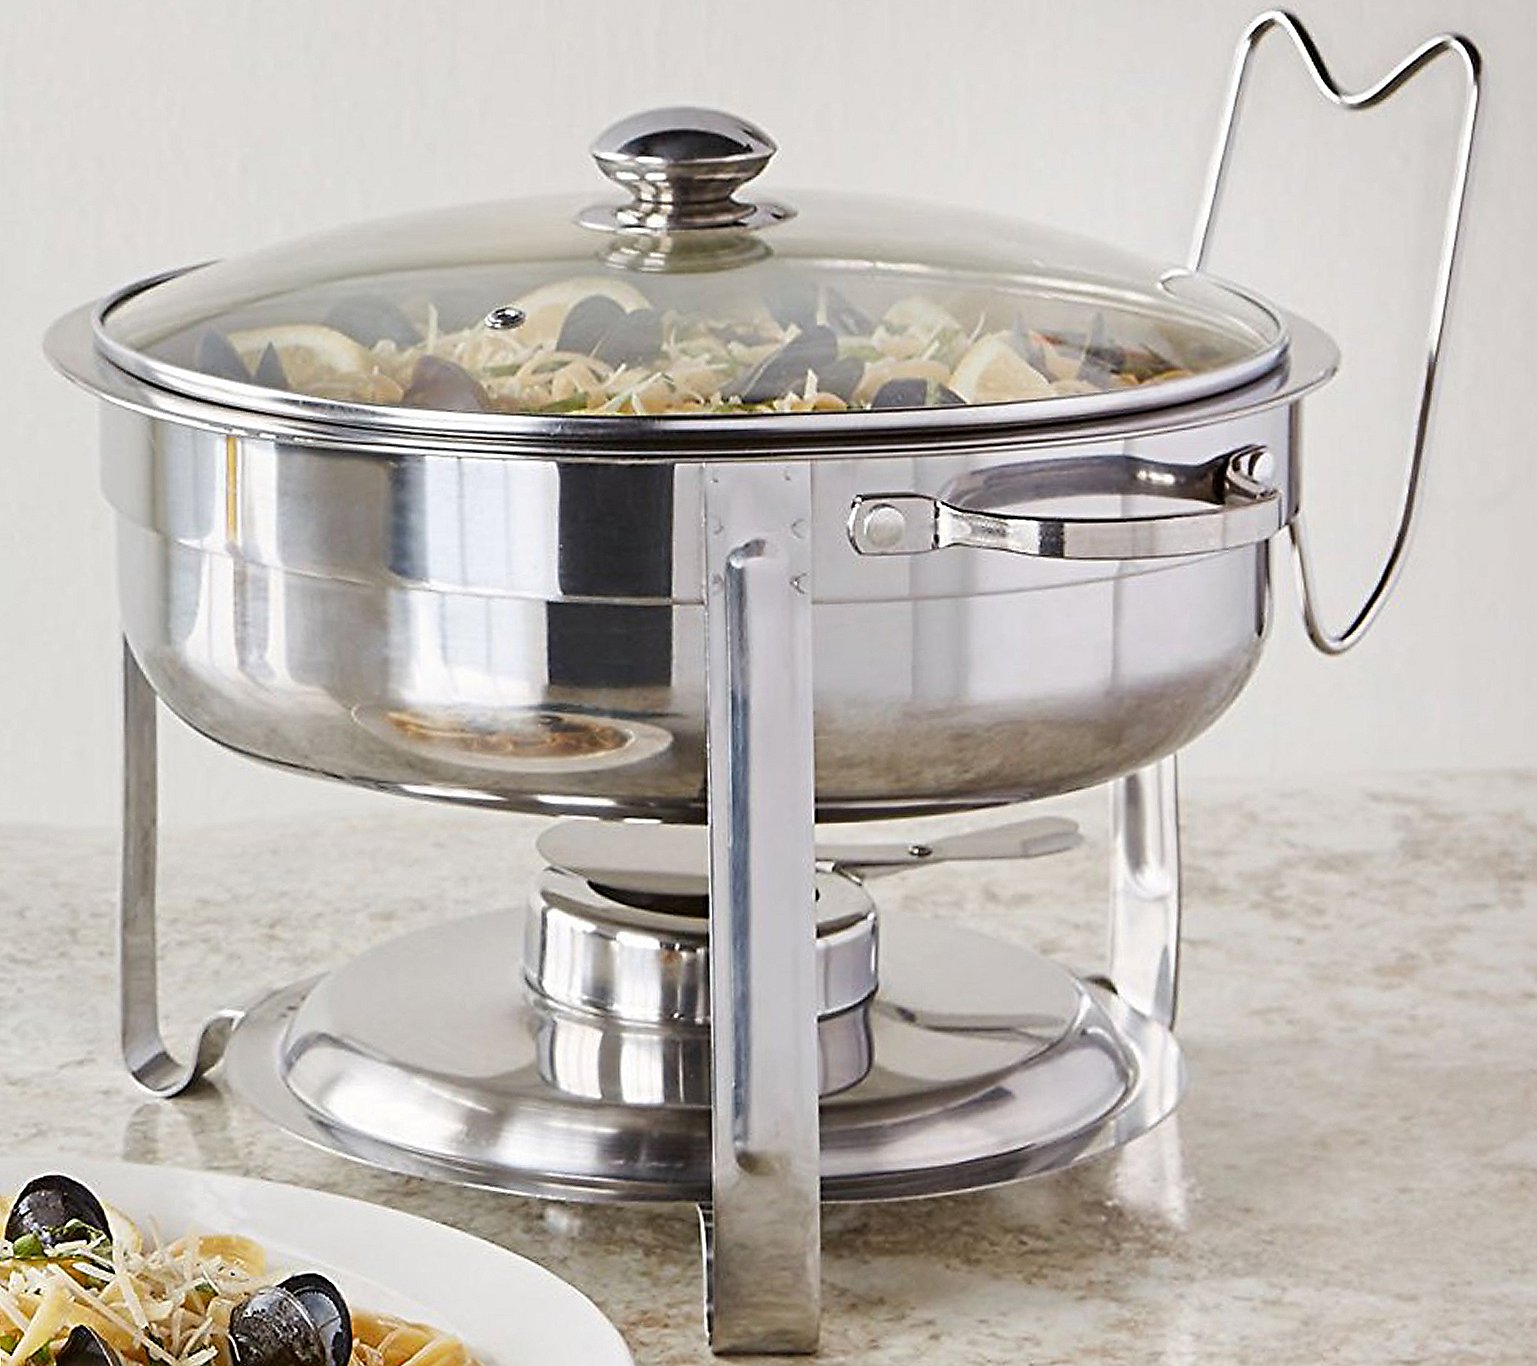 Oster Sangerfield 4.5-qt Round Chafing Dish Set